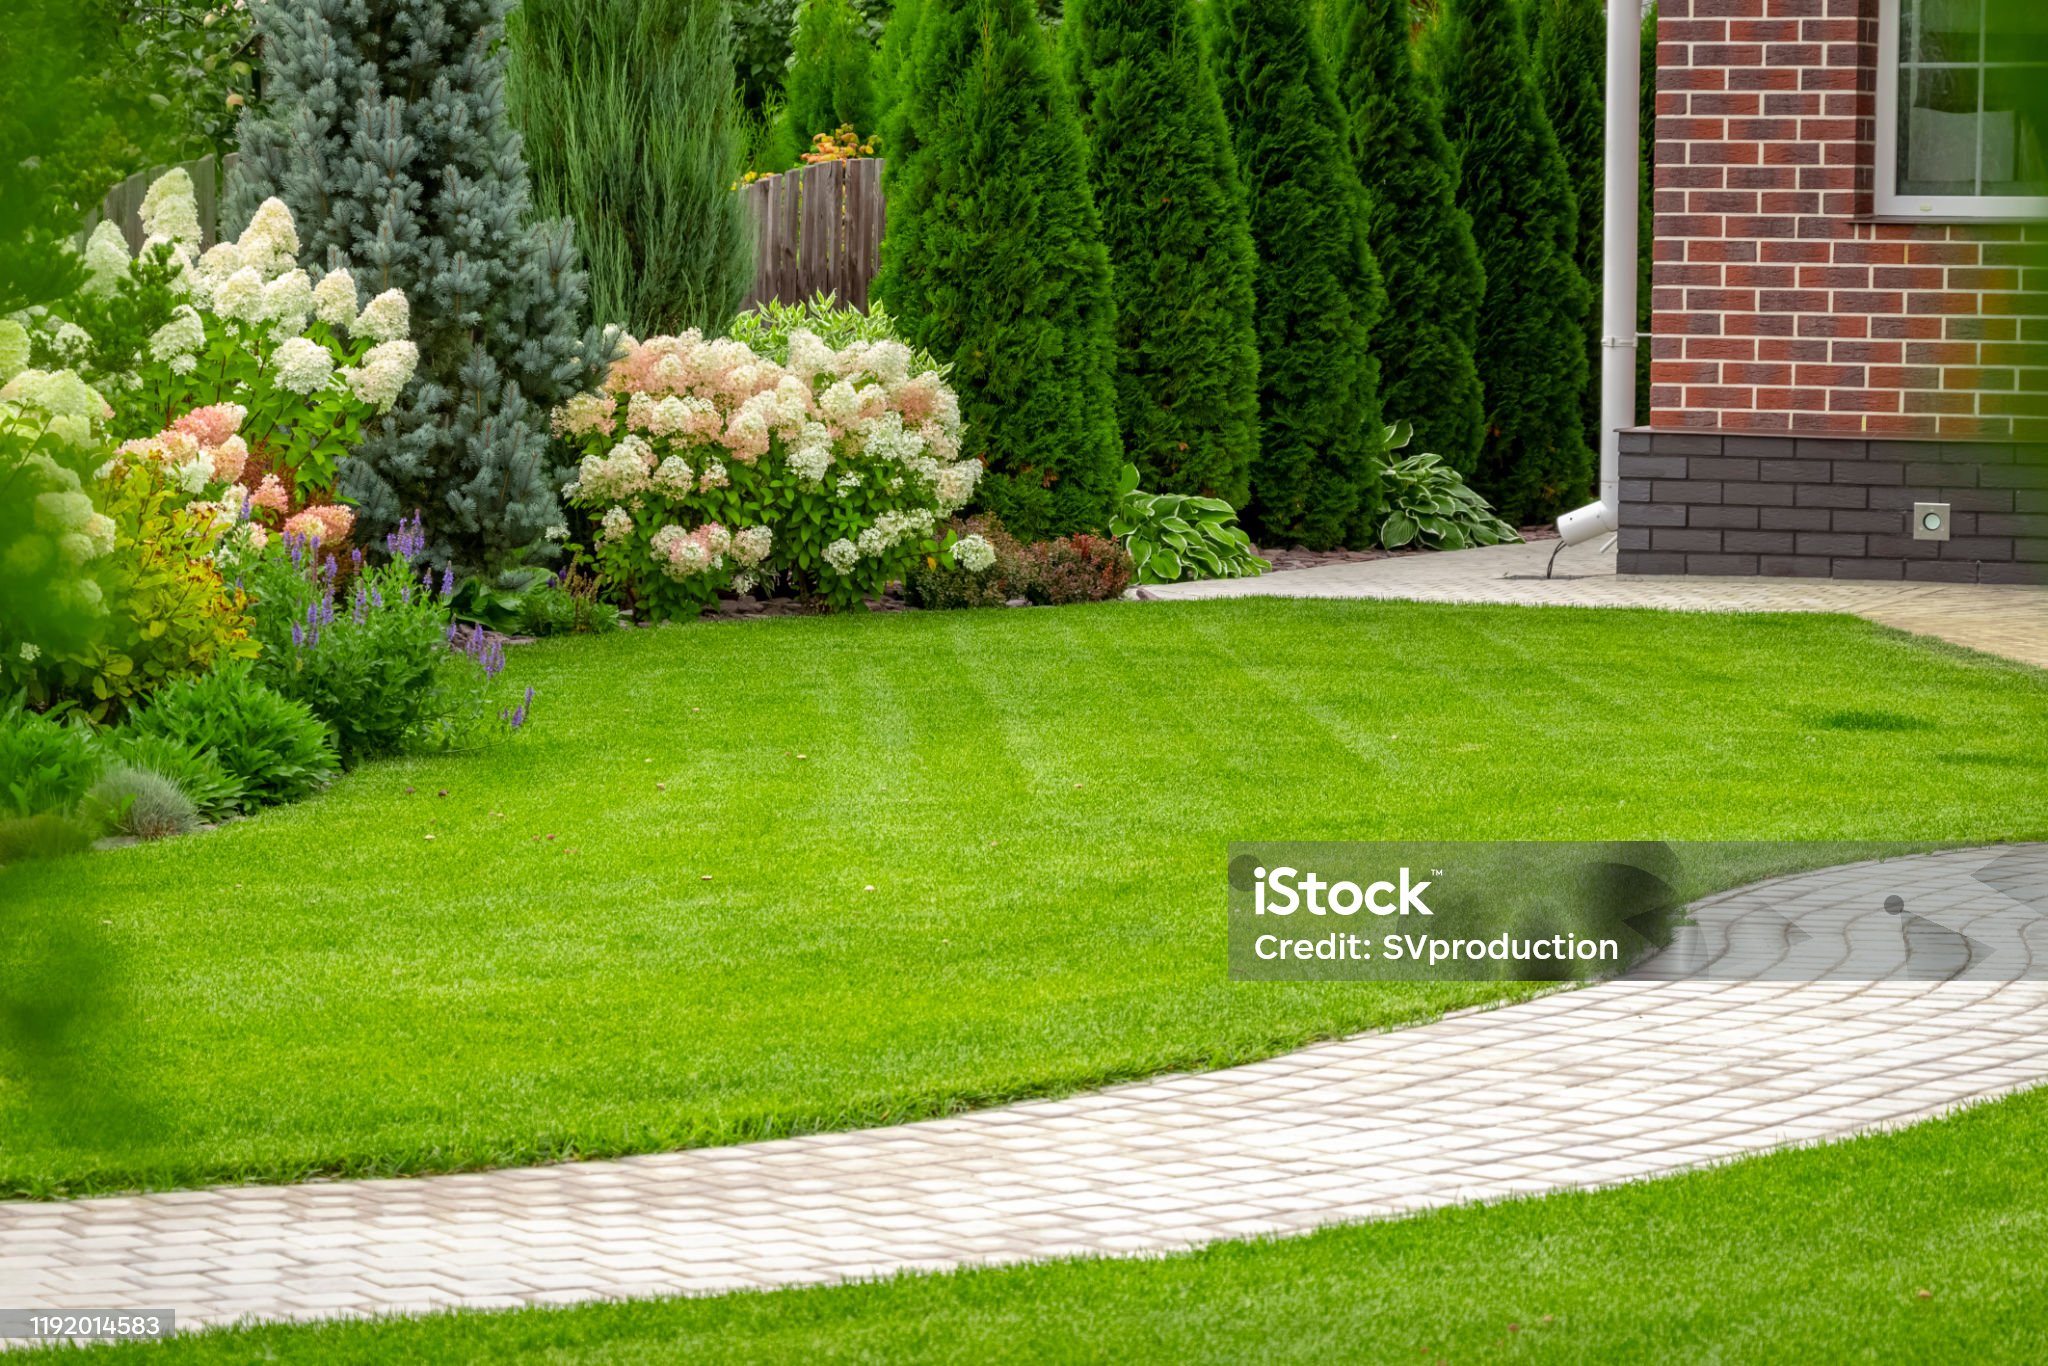 At Ace 1 Construction & Landscaping, we are committed to providing our clients with the highest service standards.